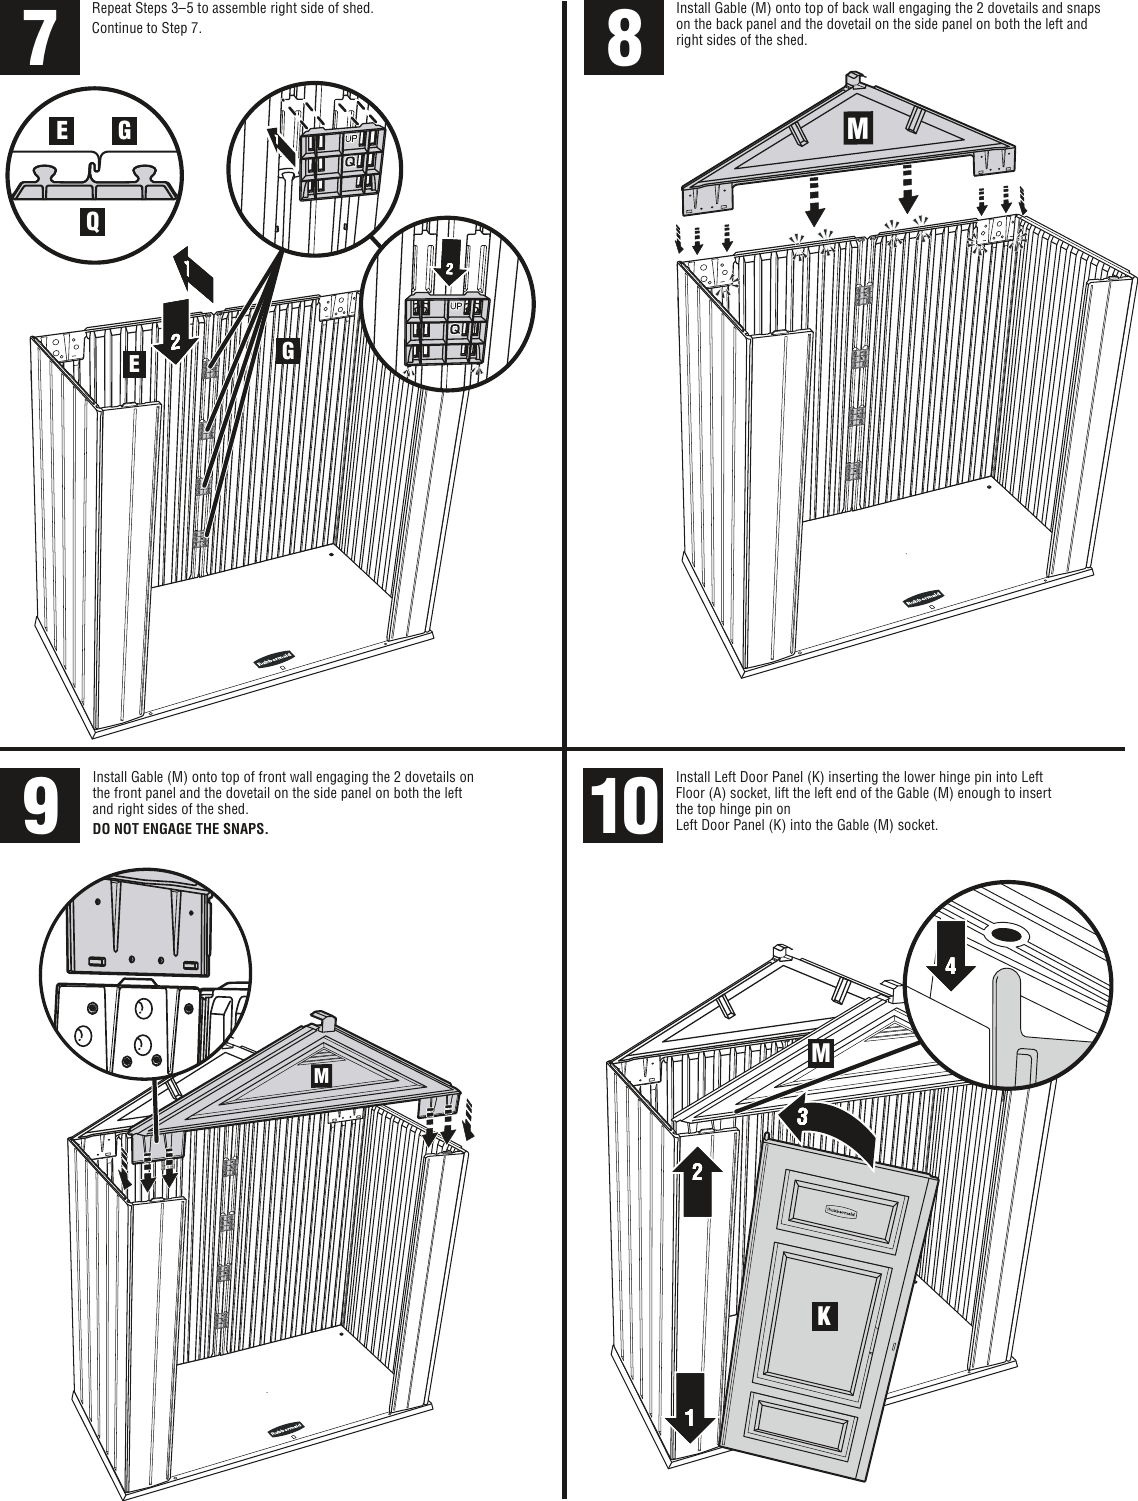 Page 4 of 9 - Rubbermaid Rubbermaid-Outdoor-Storage-1S85-Users-Manual- Big Max Jr Assembly Instruction Manual English  Rubbermaid-outdoor-storage-1s85-users-manual